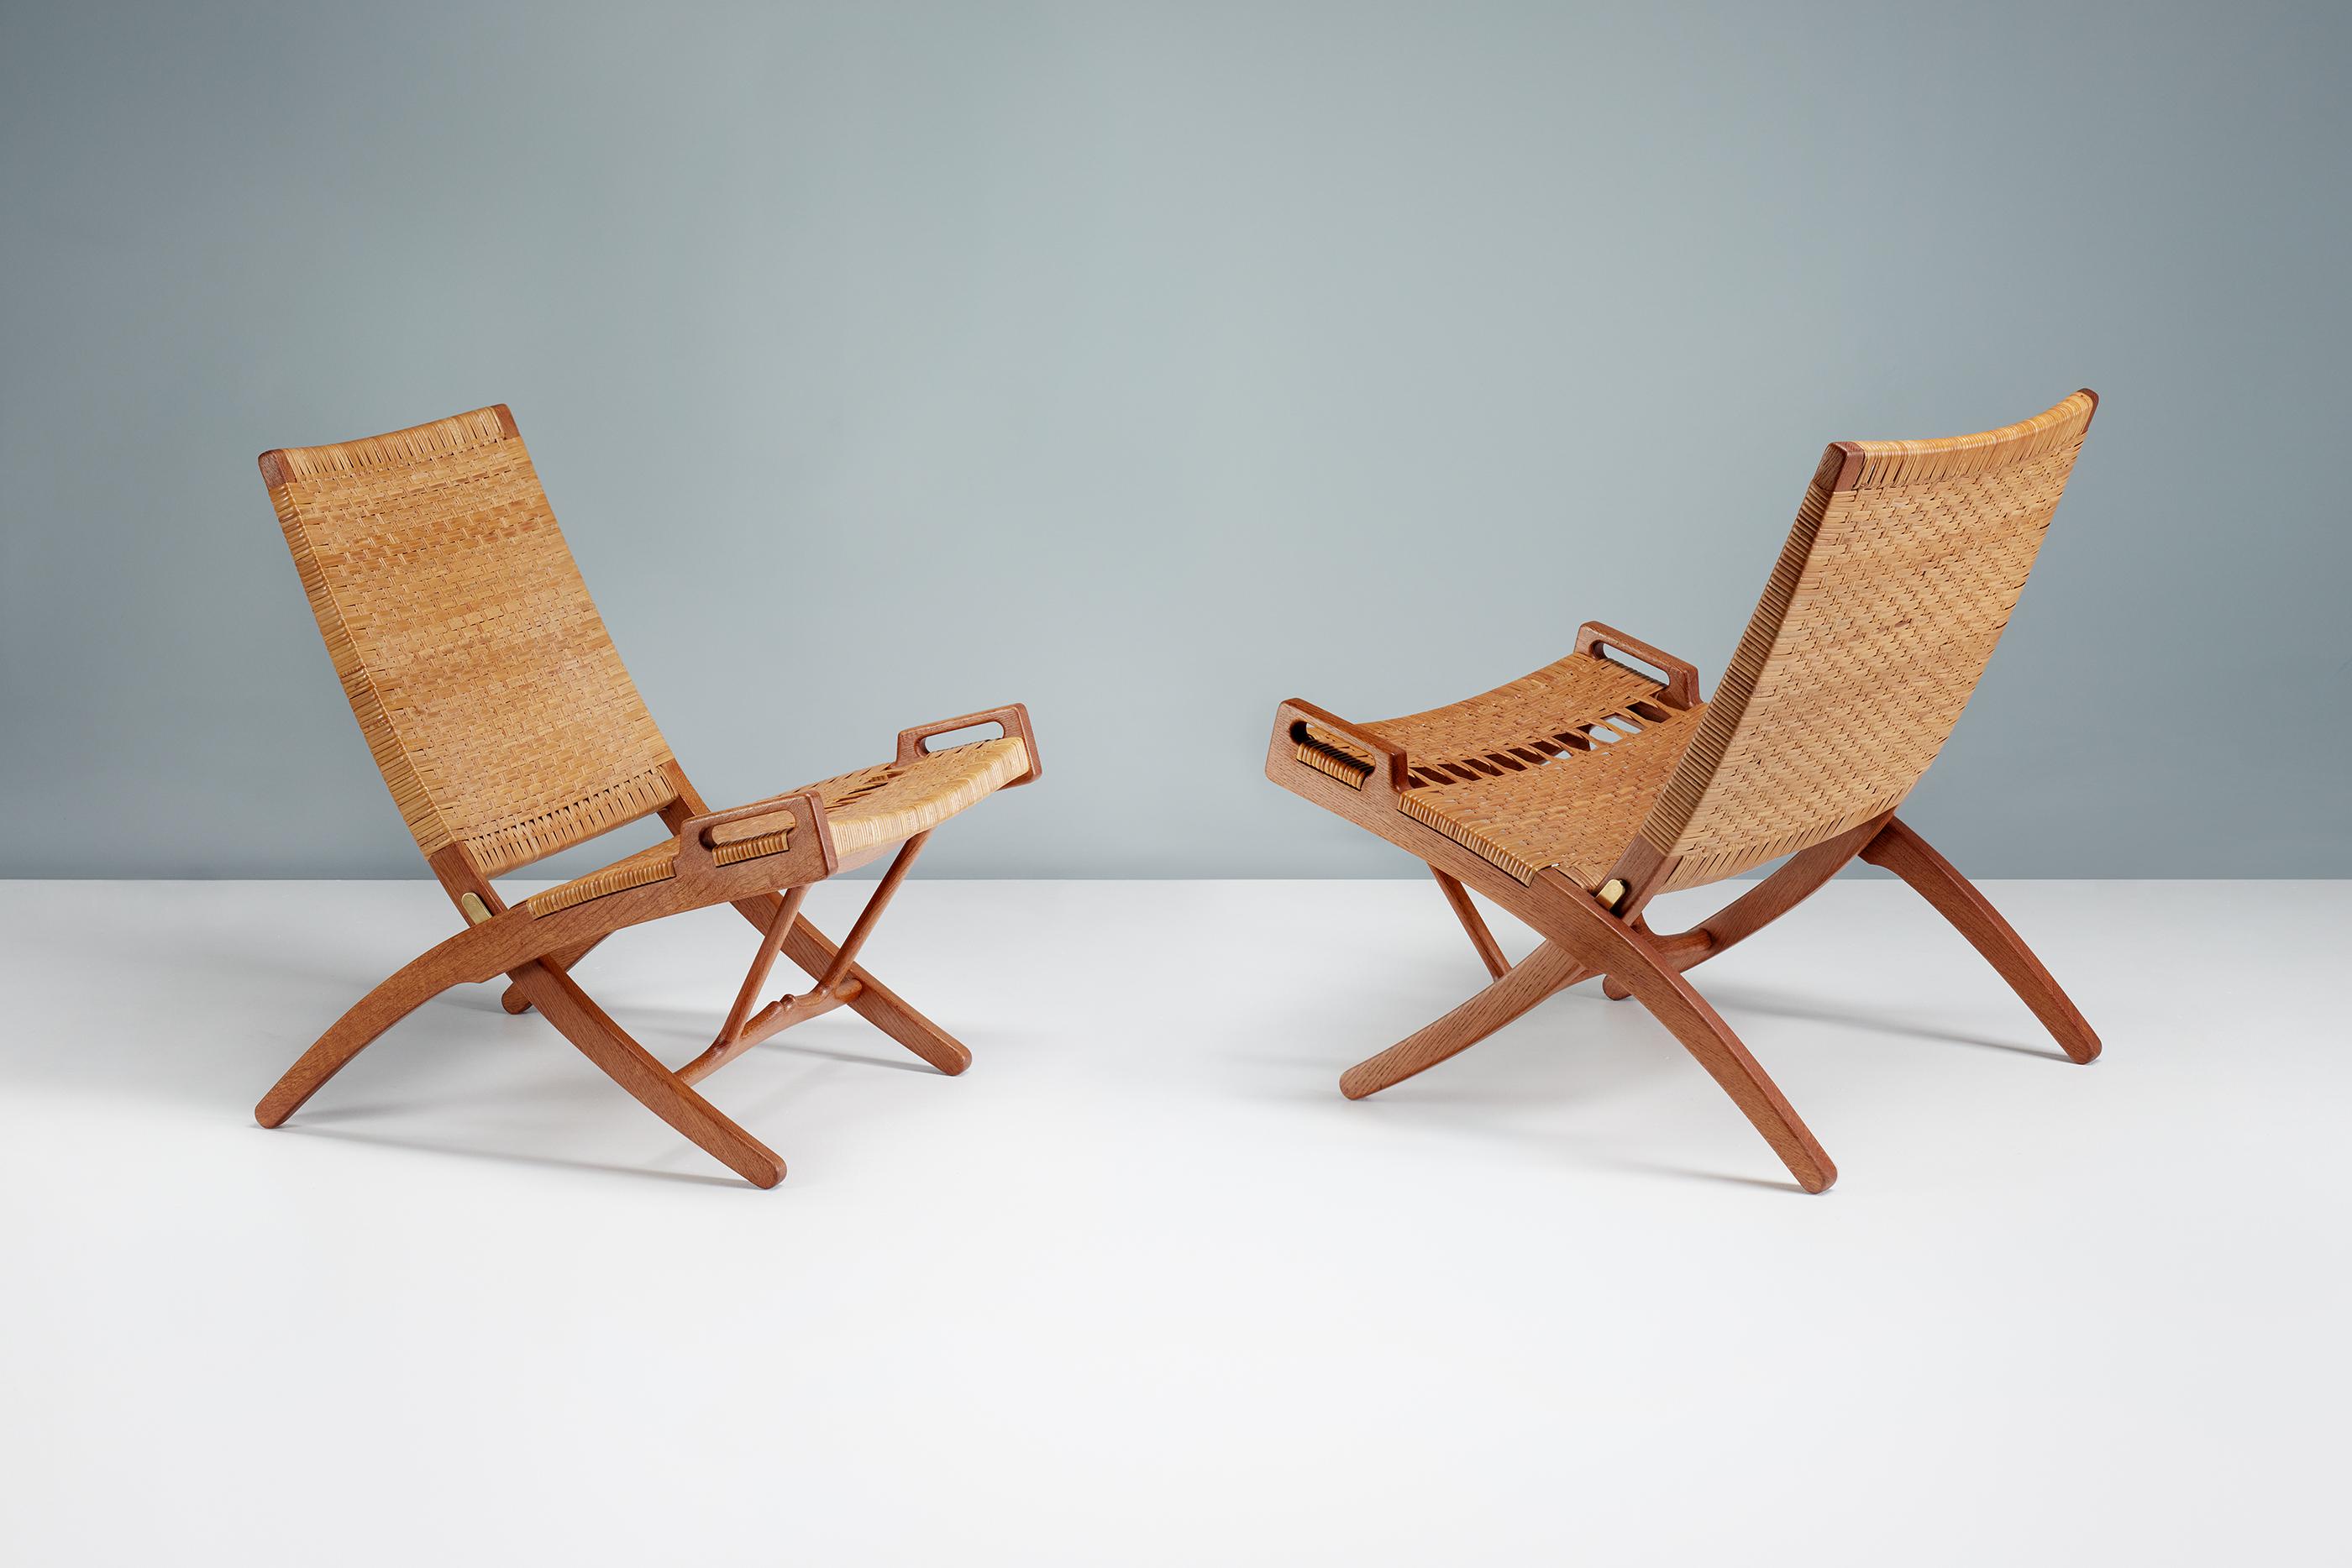 Hans Wegner JH-512 Folding Chairs, Oak

One of Danish master Hans J. Wegner's most important and iconic works. The Model 512 chair was produced by master cabinetmaker Johannes Hansen in Copenhagen during their golden period of collaboration that